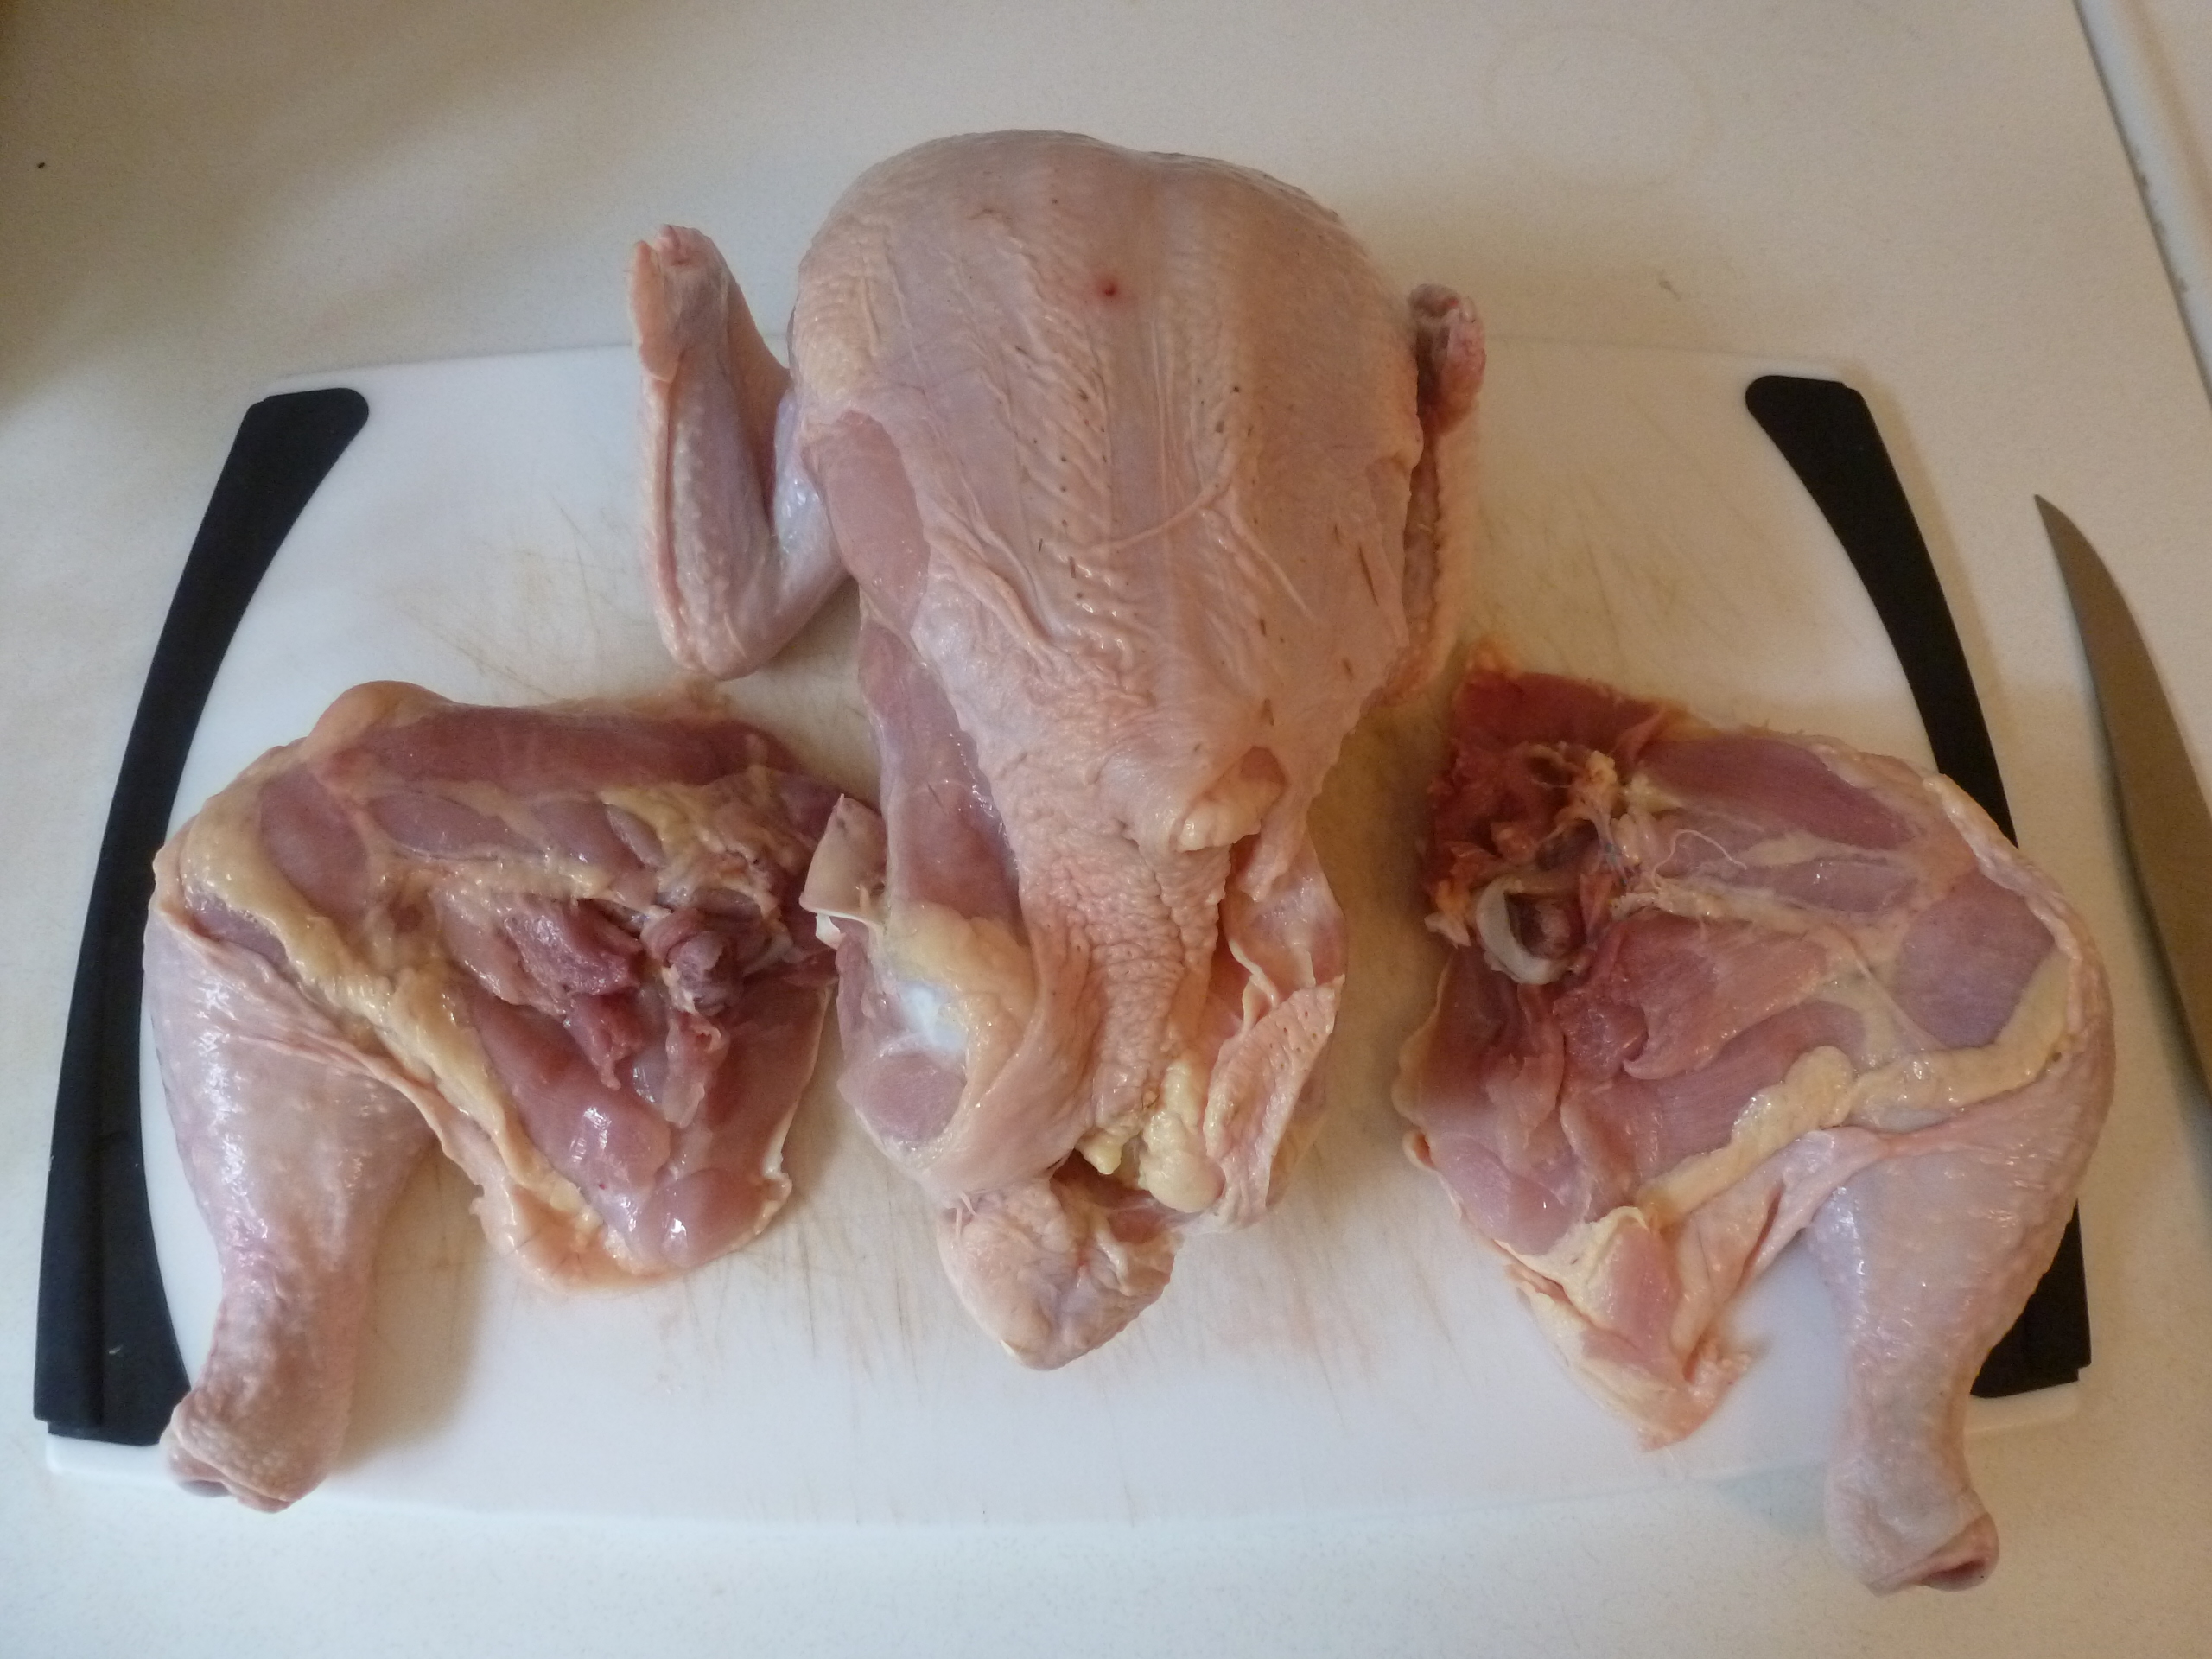 The chicken with both legs separated